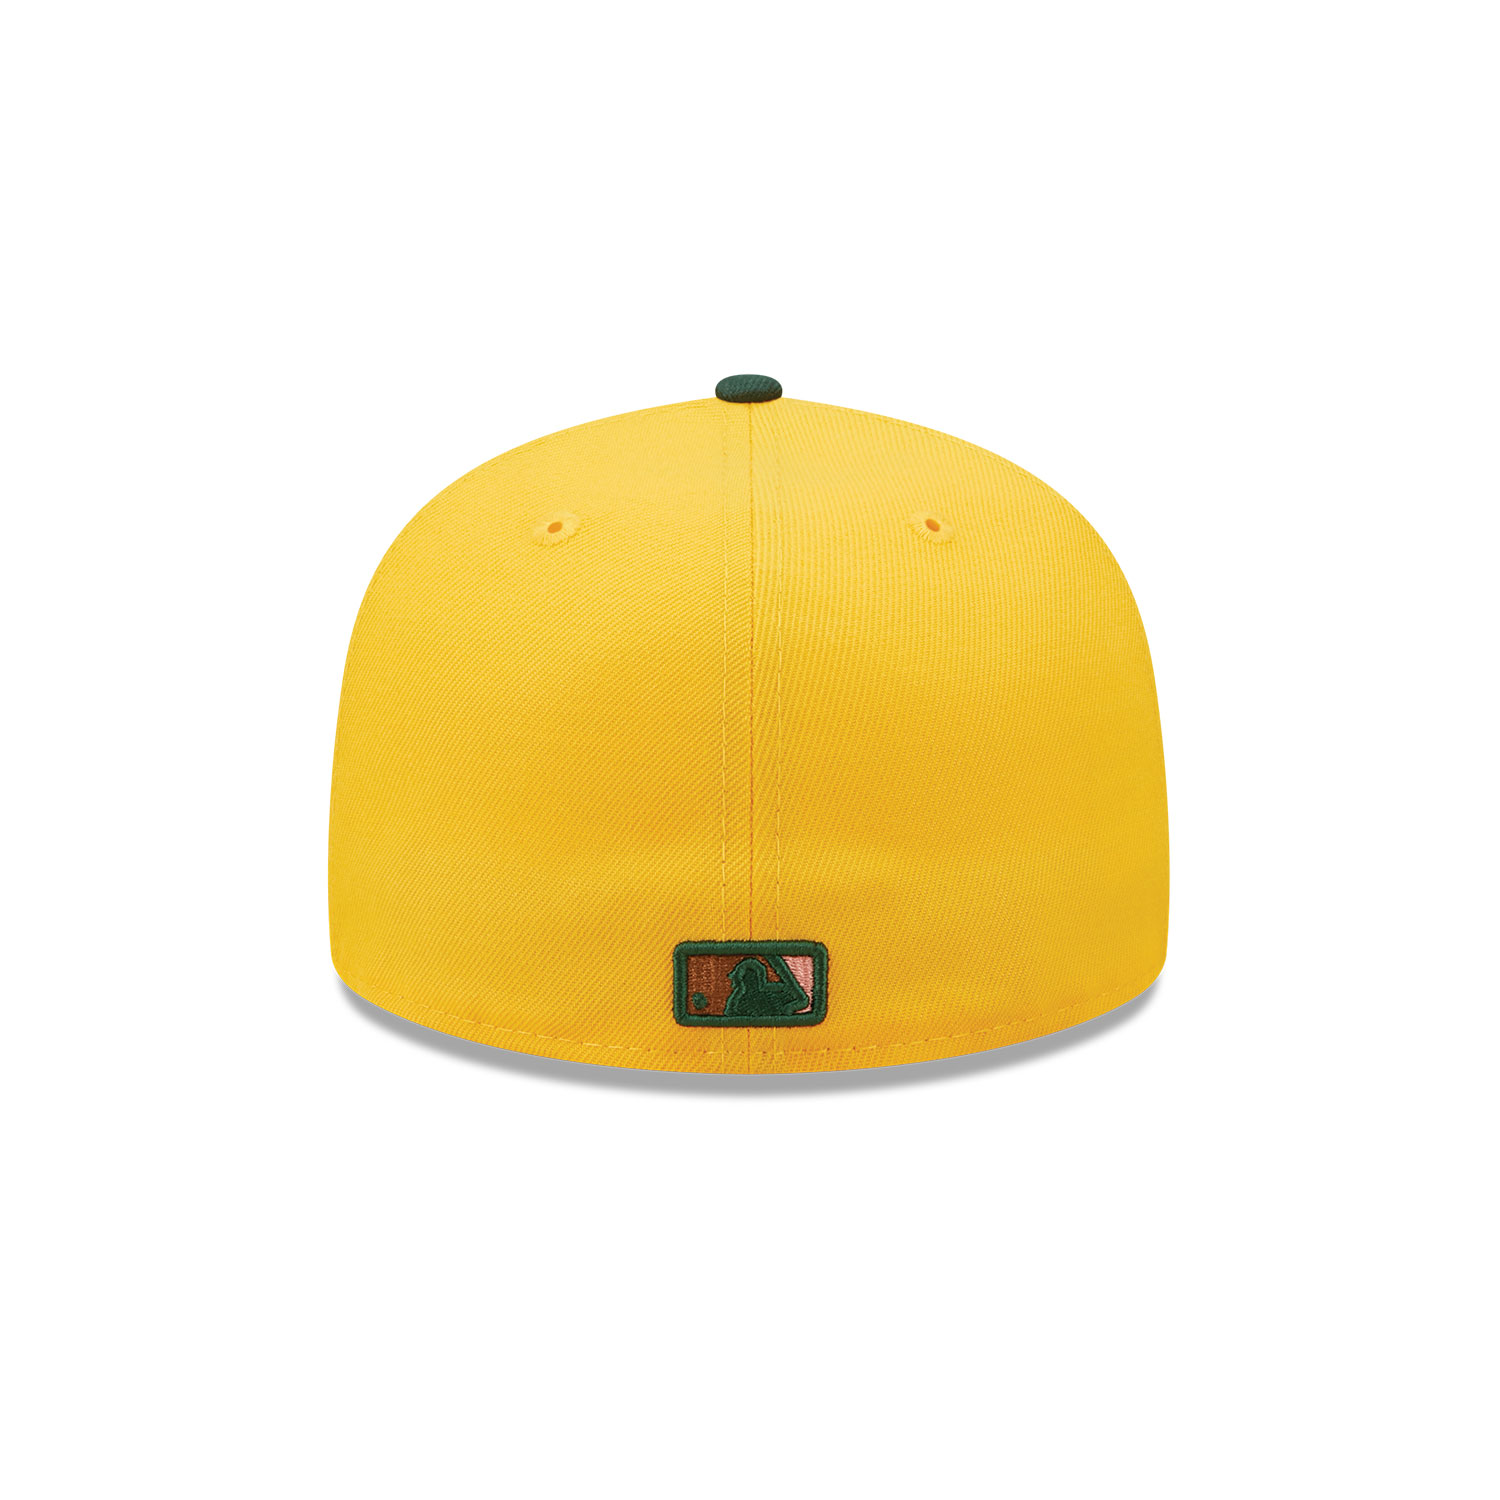 Chicago Cubs Back to School Yellow 59FIFTY Fitted Cap